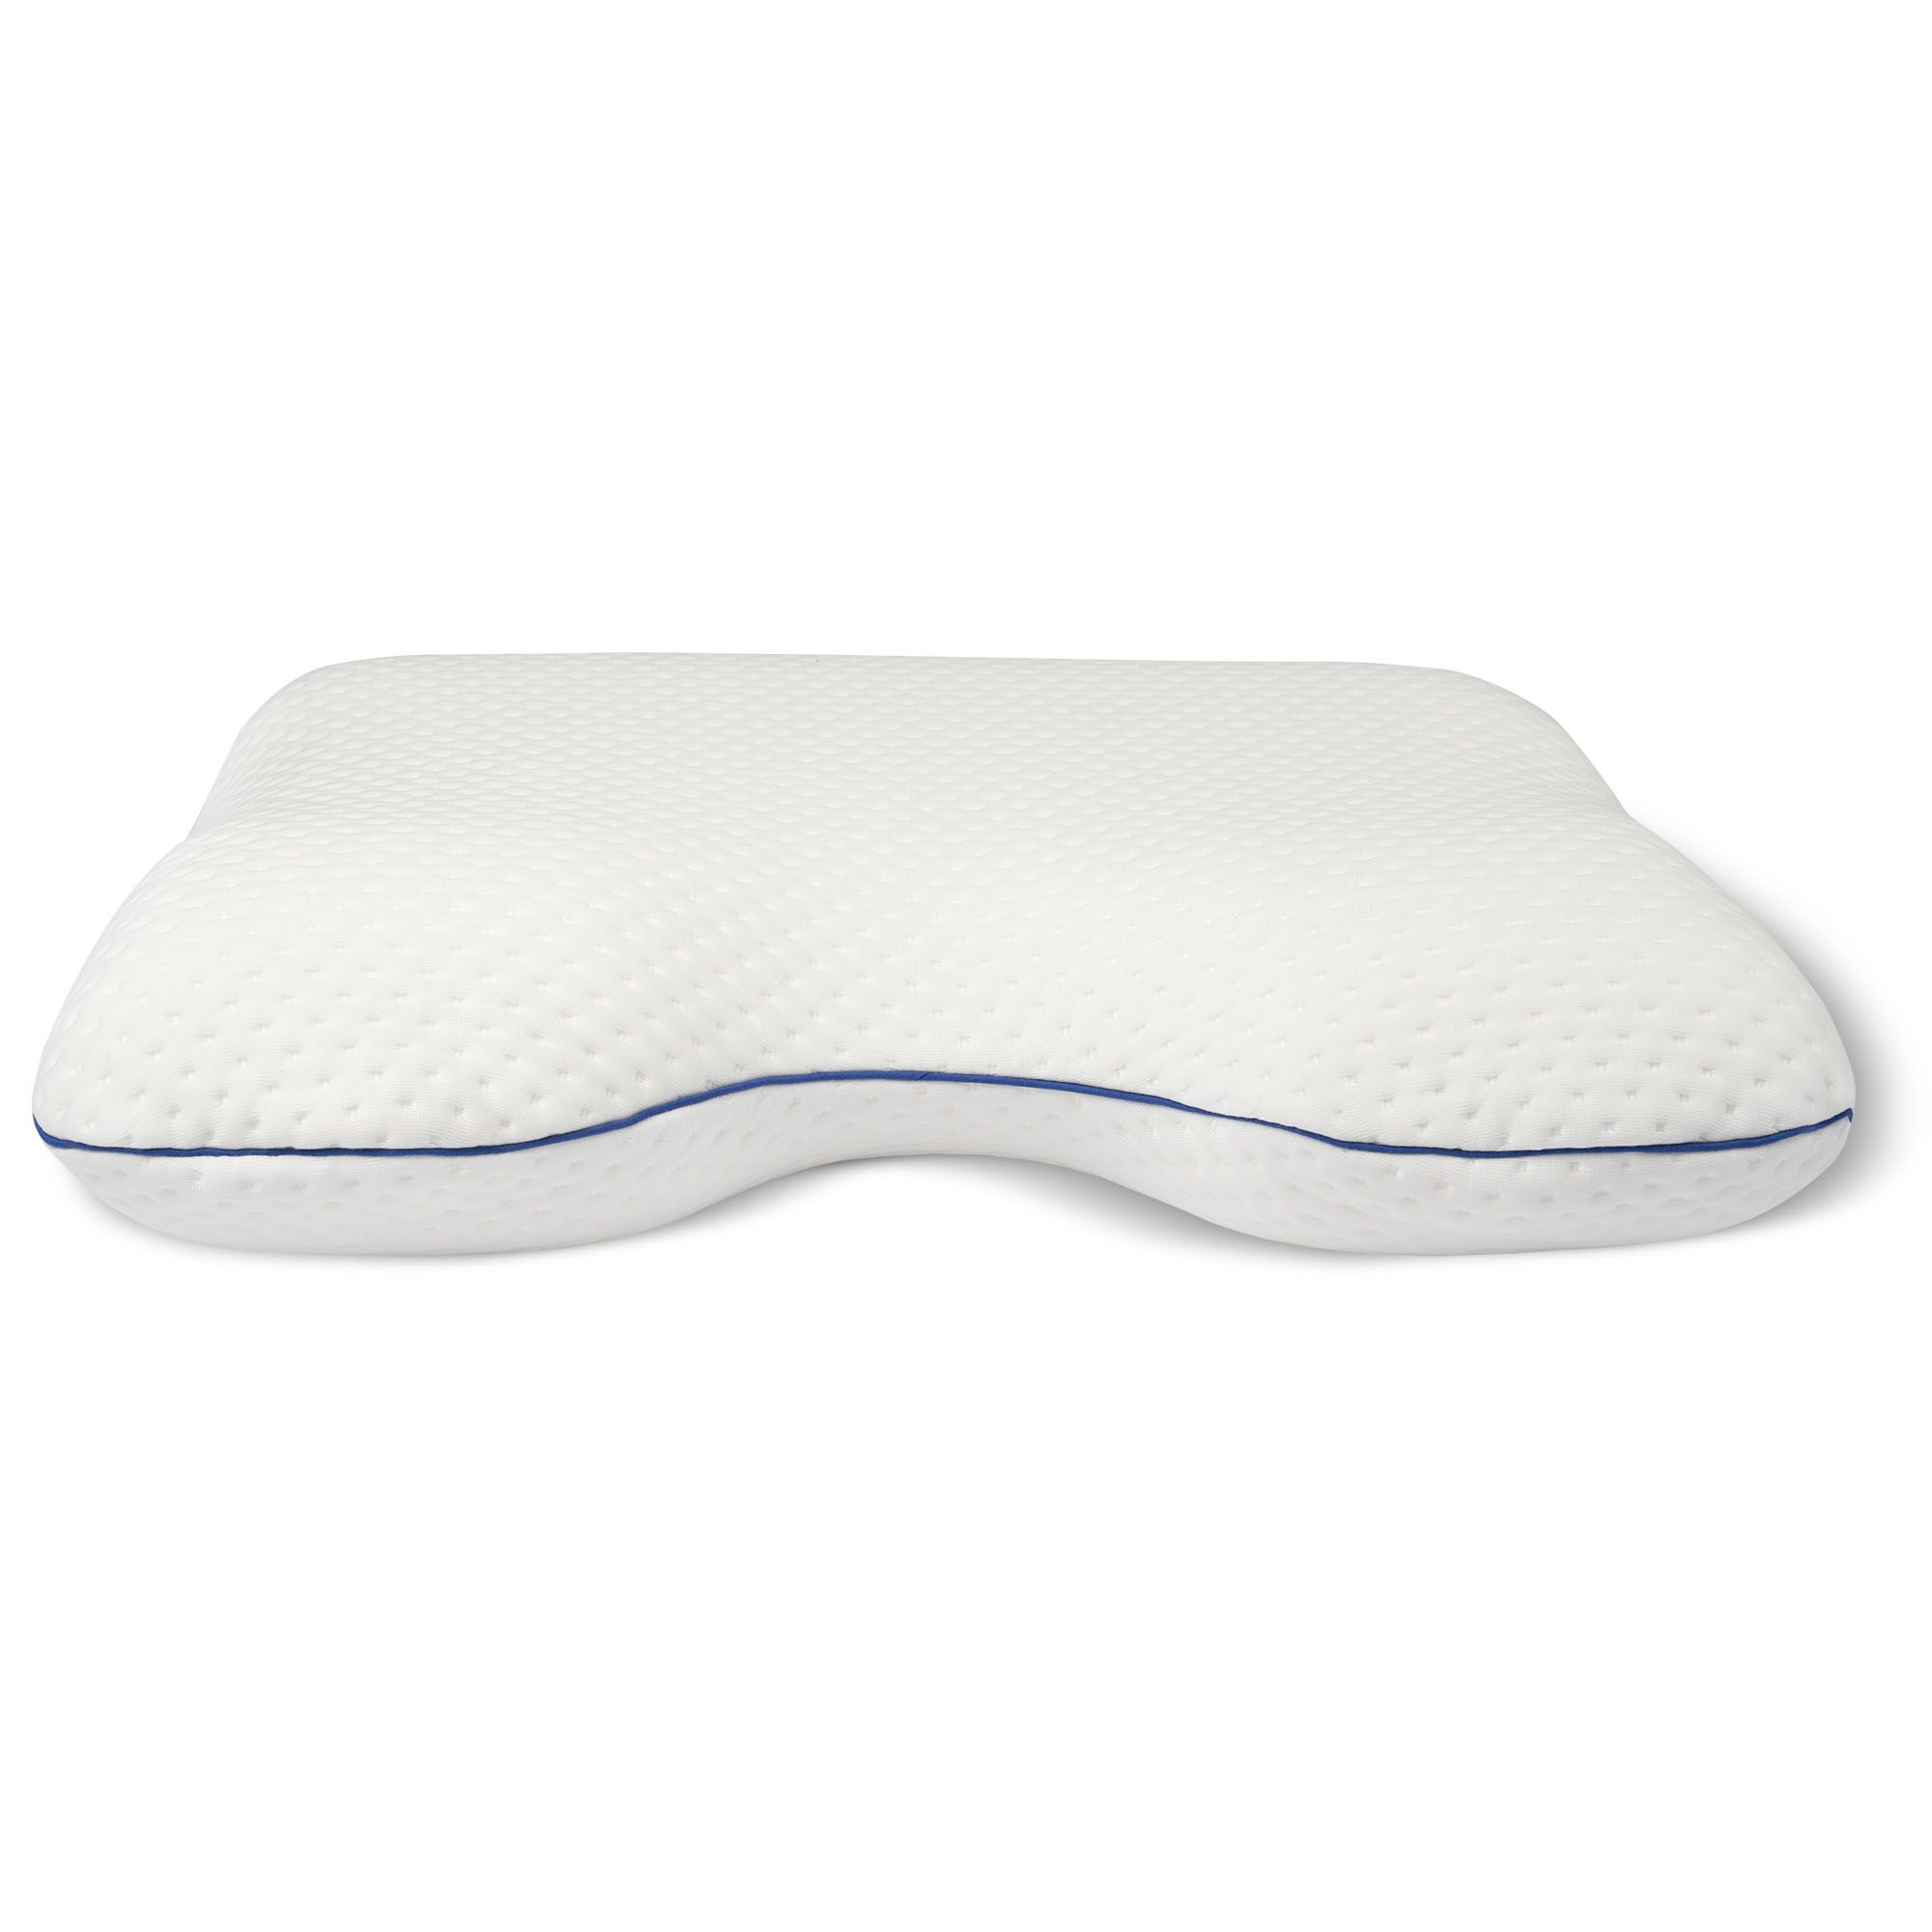 Dunimed Anti Snoring Pillow front view